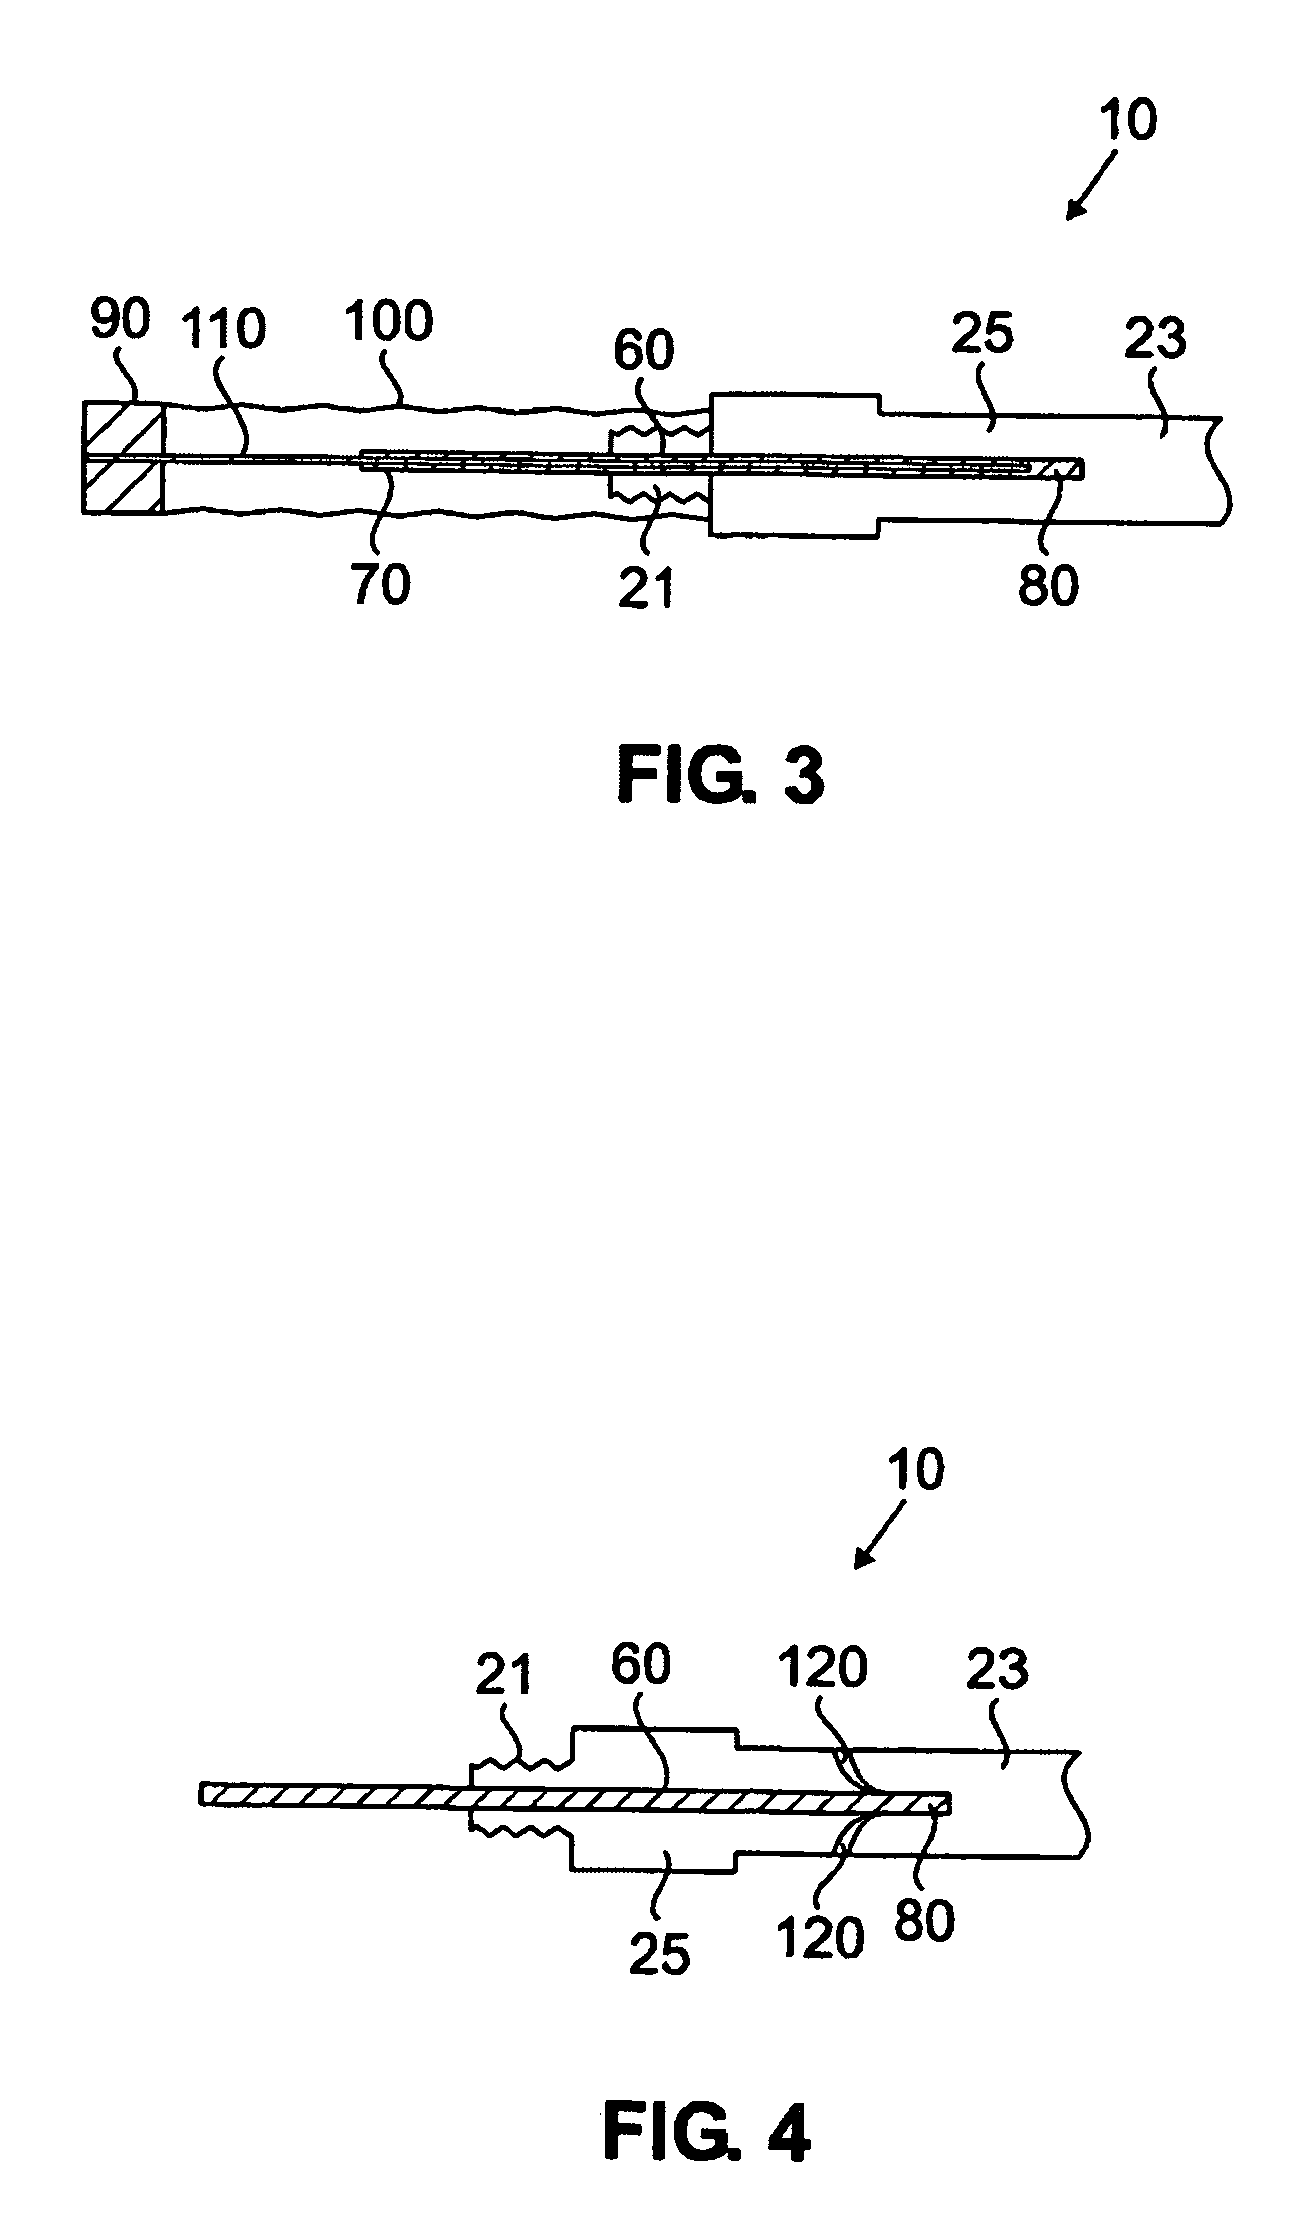 System for providing a medical device with anti-microbial properties